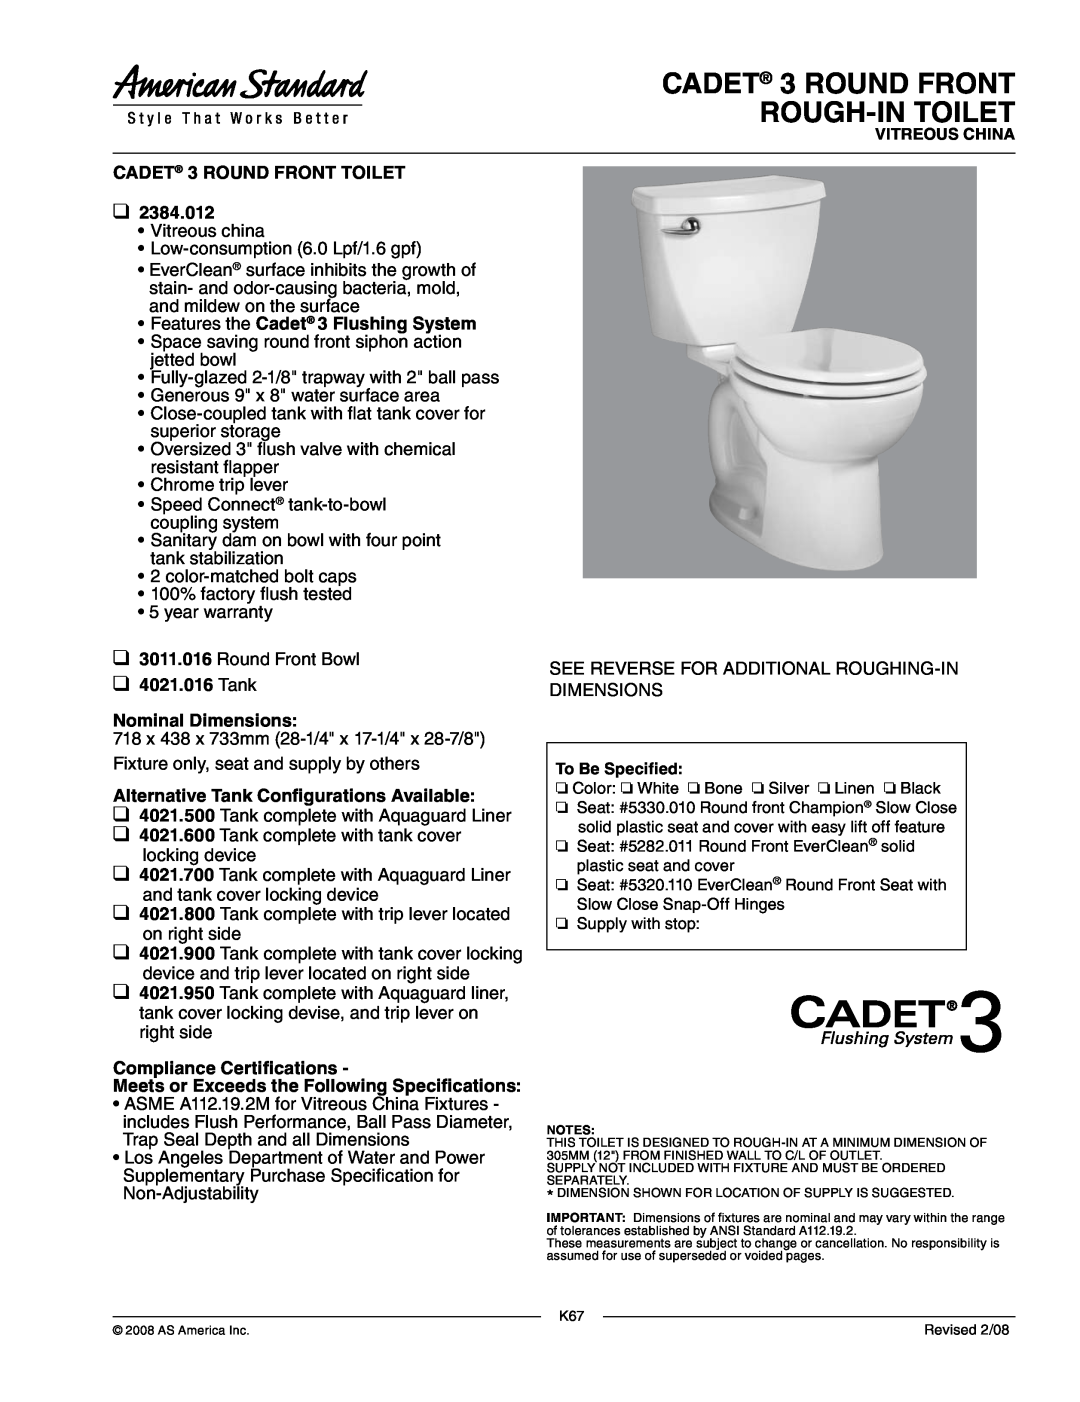 American Standard 2384.012 dimensions CADET 3 ROUND FRONT ROUGH-INTOILET 